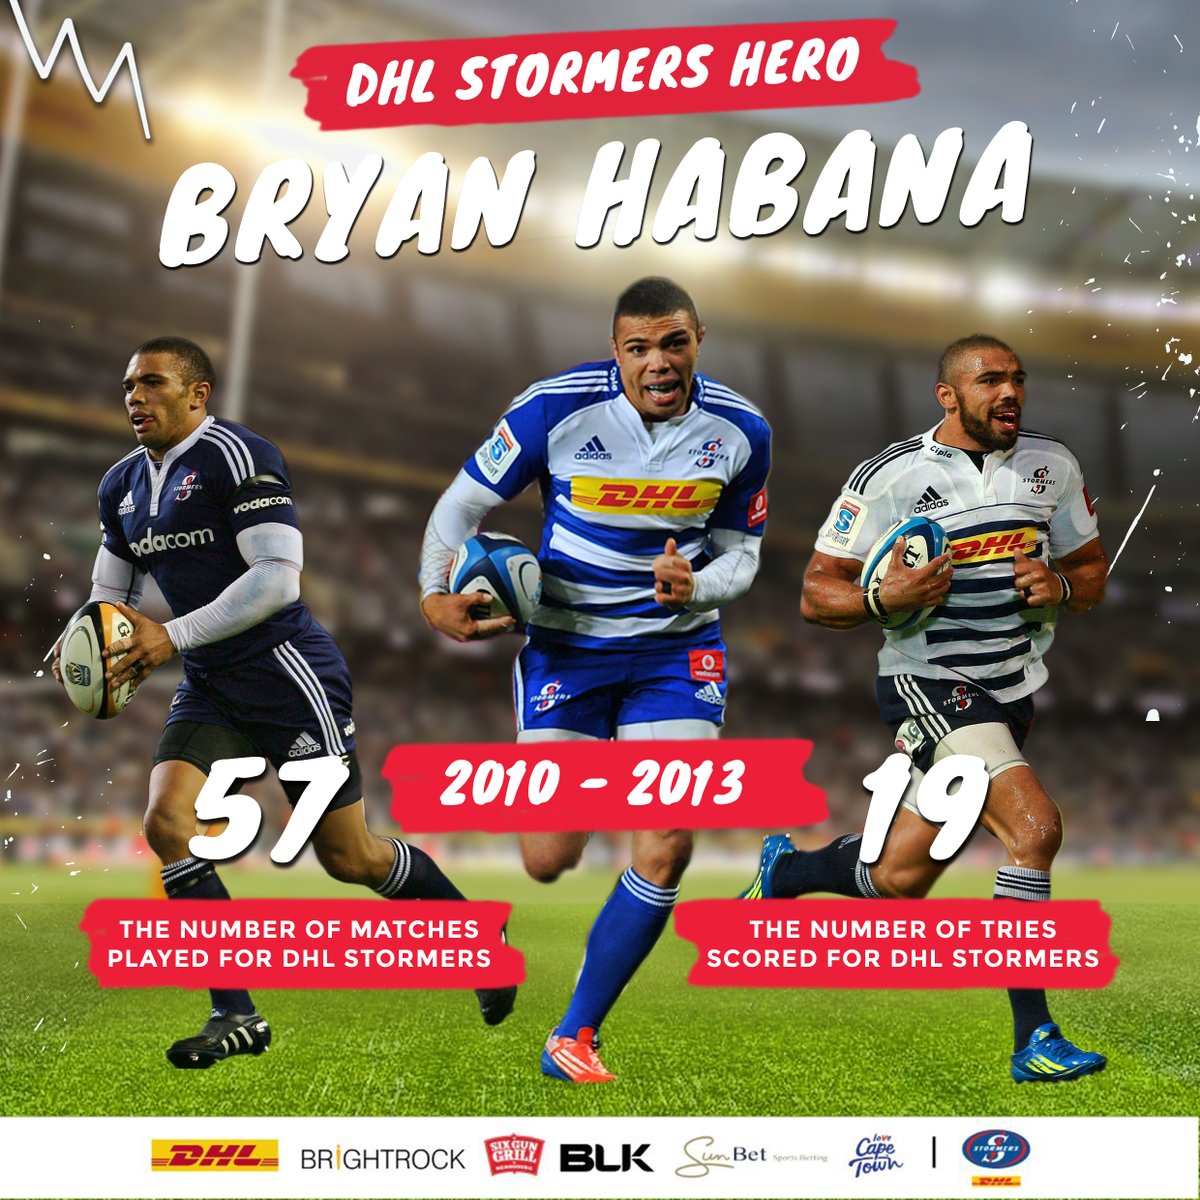 Regarded as one of the most lethal wingers ever, @BryanHabana was a star performer and consummate professional for the DHL Stormers. #iamastormer #dhldelivers thestormers.com/dhl-stormers-l…